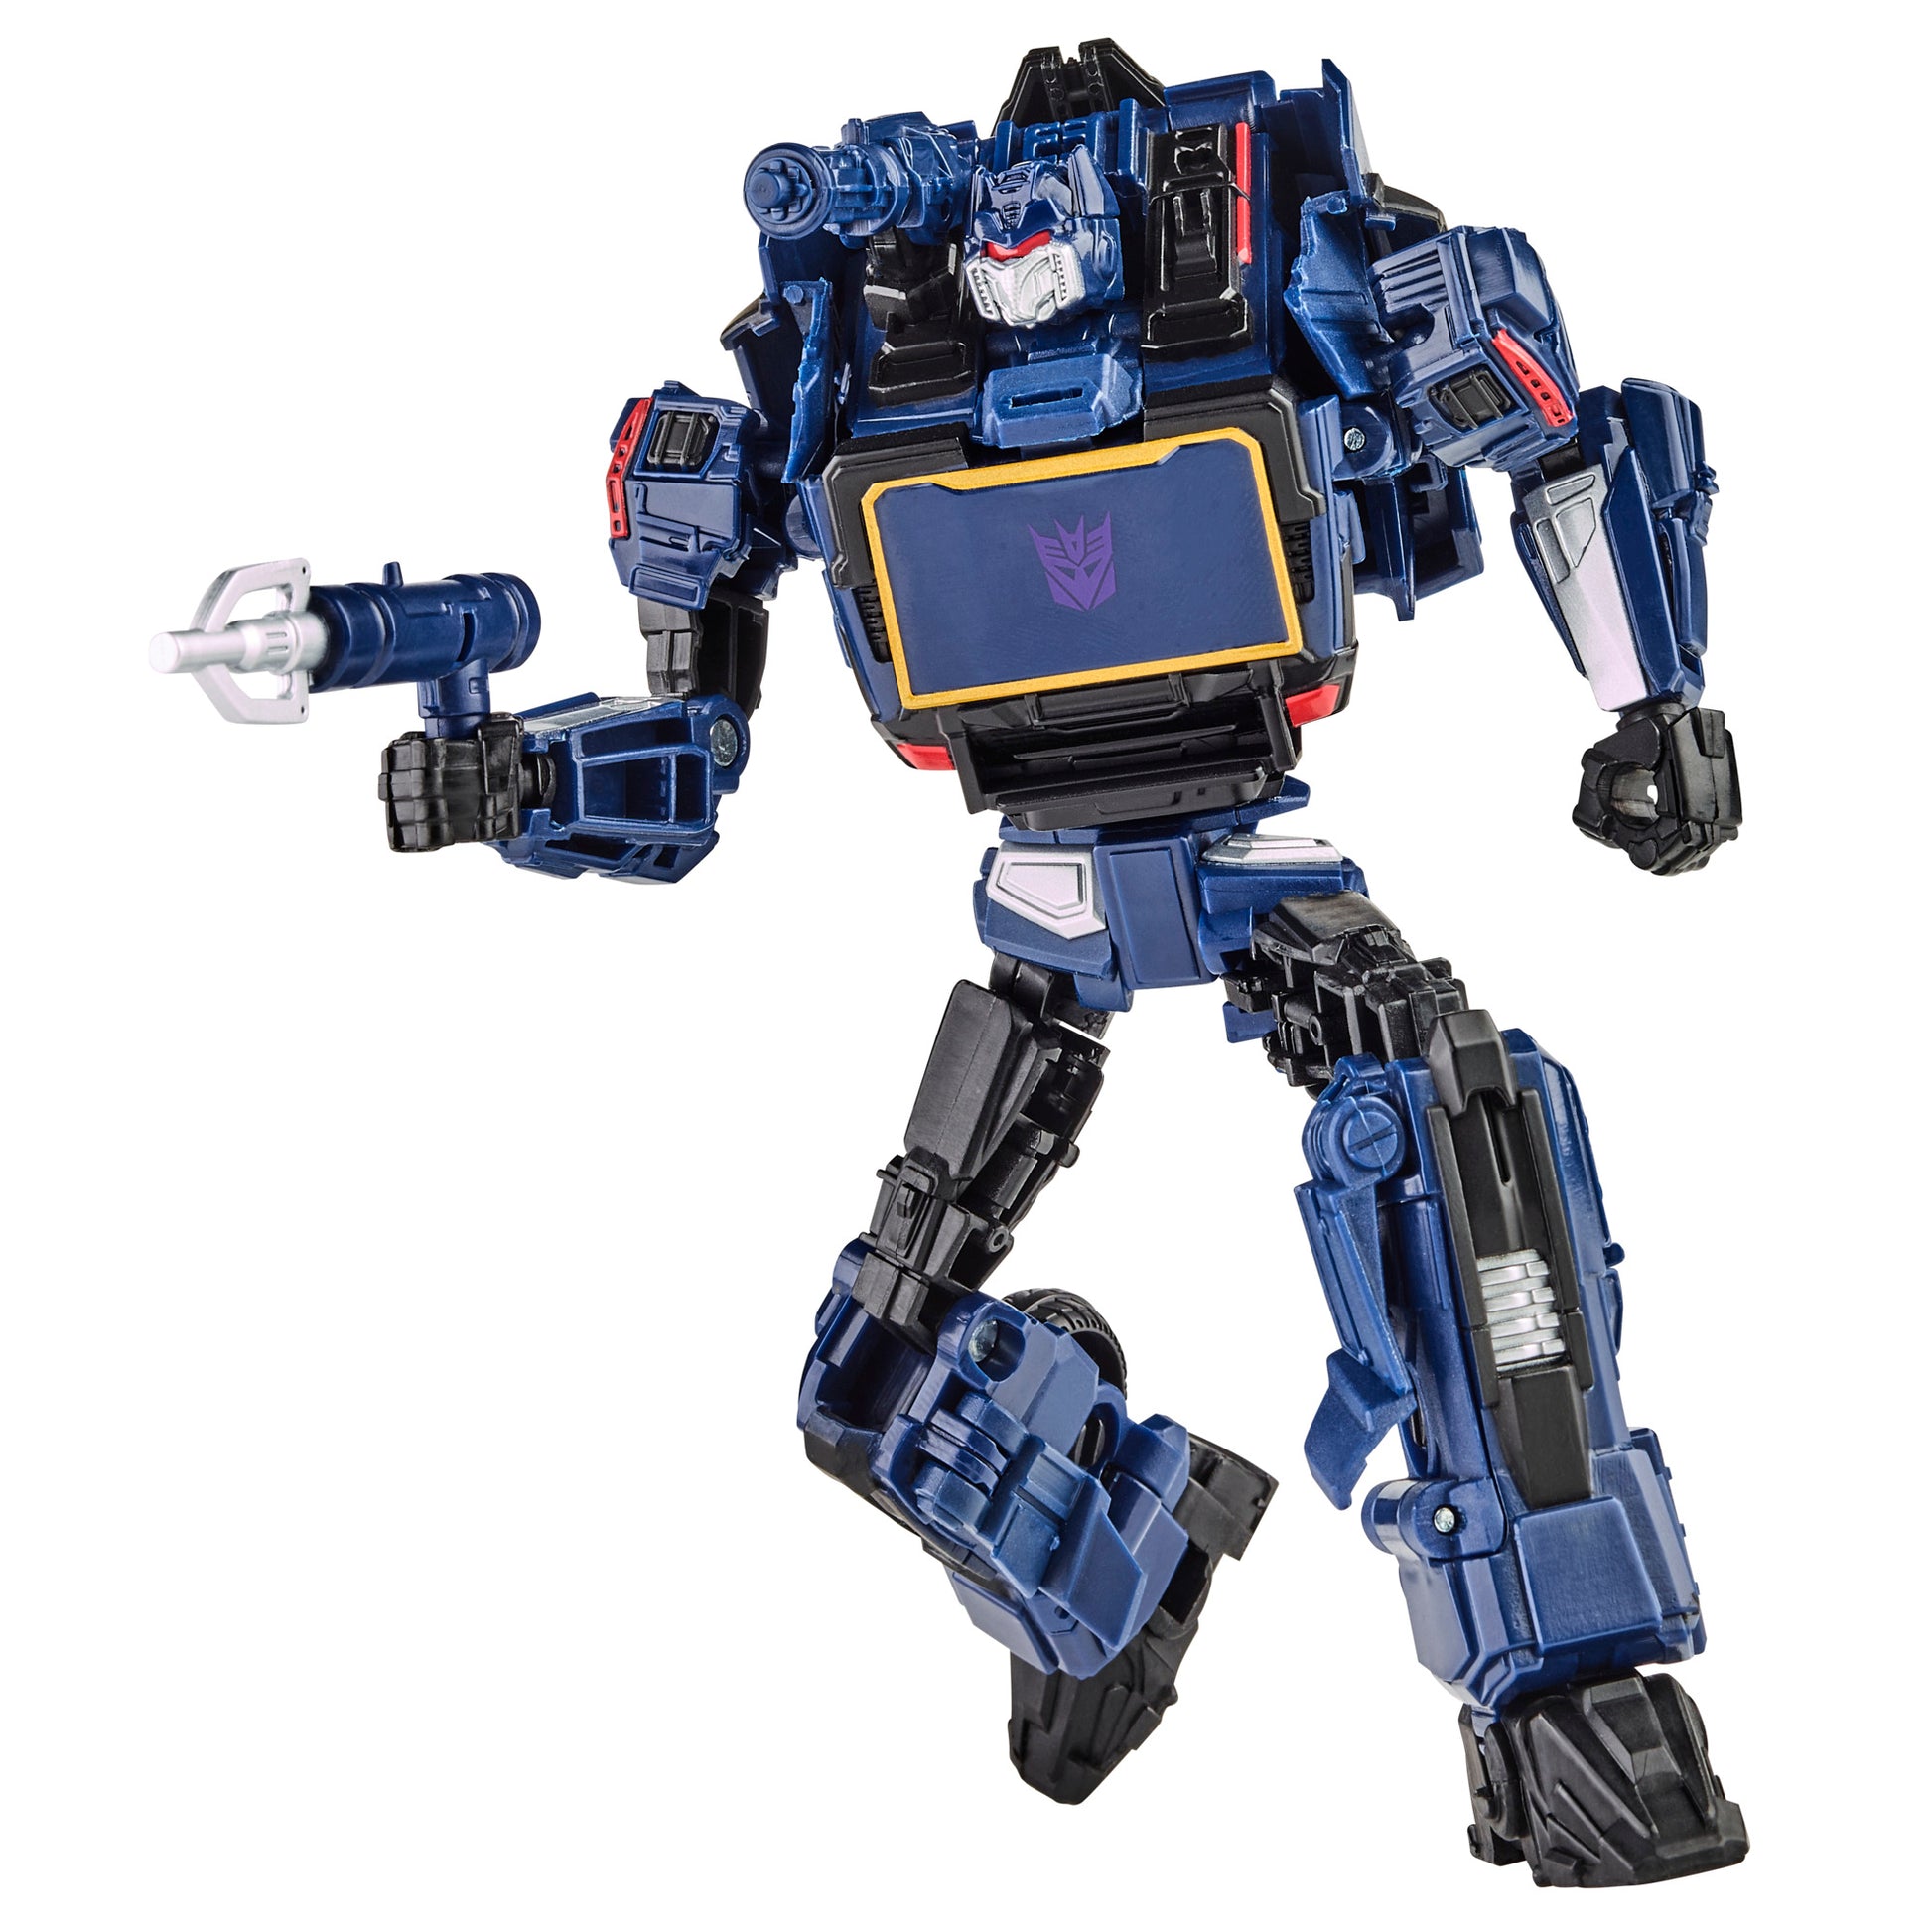 Transformers: Reactivate Video Game-Inspired Optimus Prime and Soundwave Action Figures